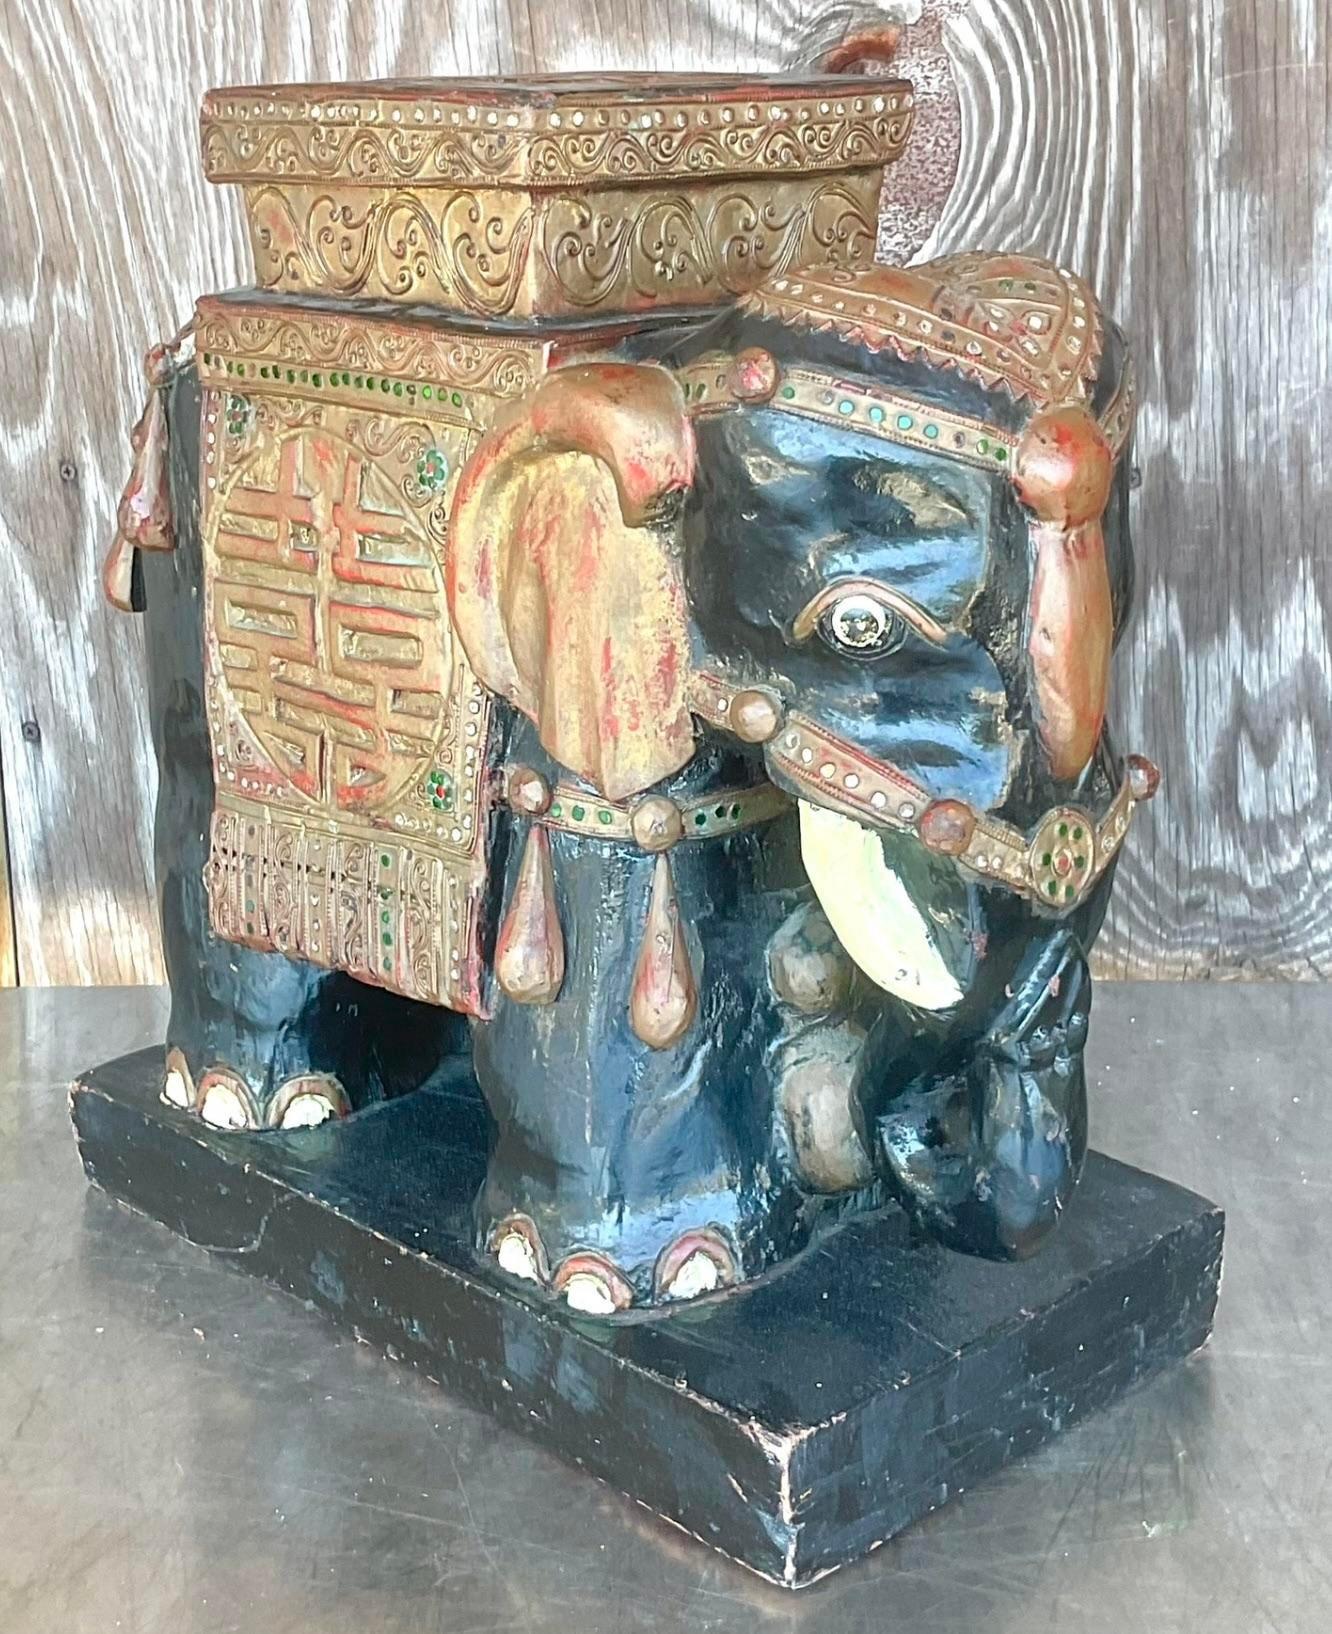 A handsome Boho carved wooden elephant. A much older piece with gorgeous all over patina from time. Small area of hand set s jewels add to the look. Acquired from a Palm Beach estate.